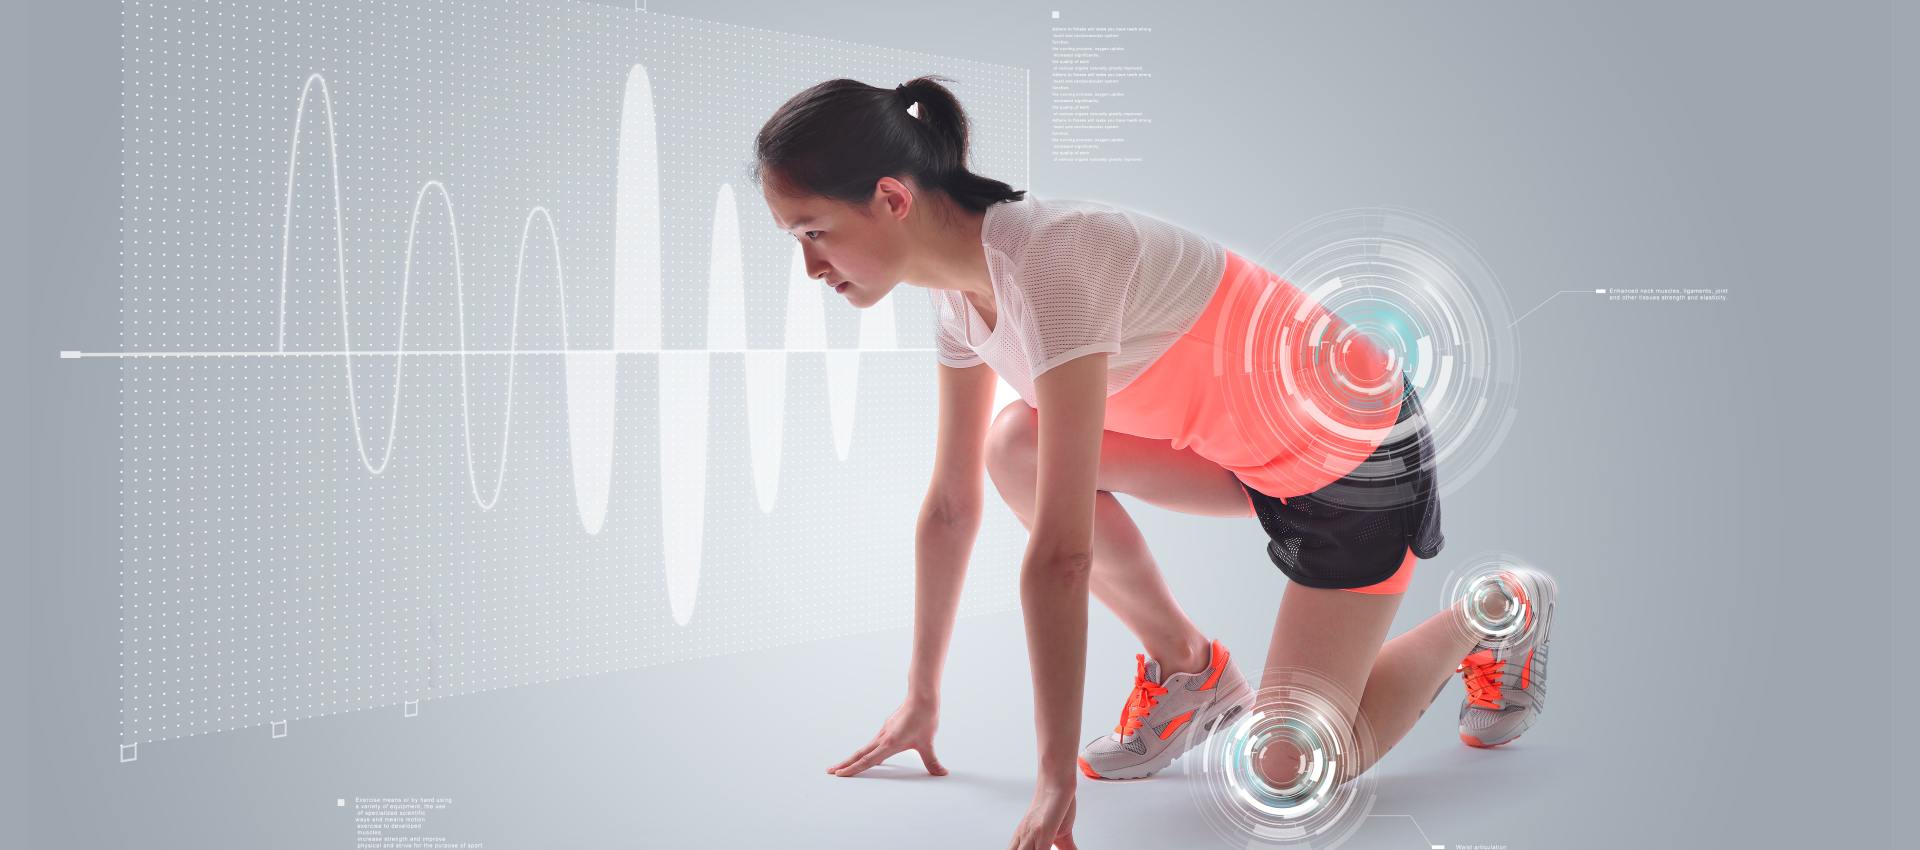 A Board Certified Orthopedic Surgeon in athletic gear crouches at a starting position, with digital graphs and data visualizations surrounding her, emphasizing motion and fitness tracking.